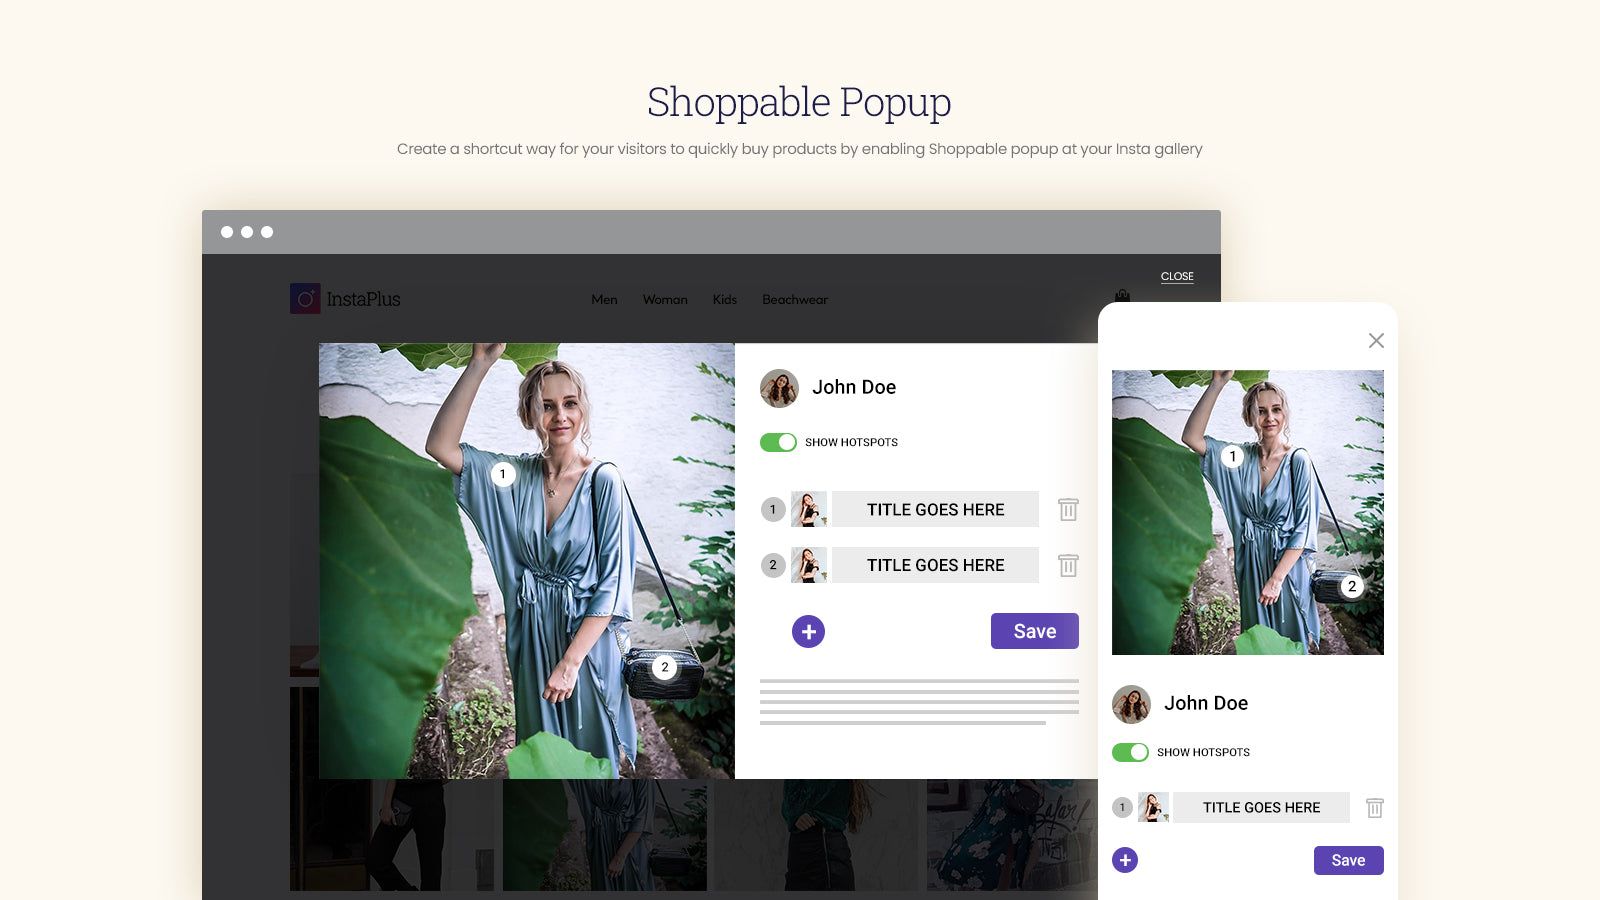 Engage your customers by enabling shoppable popups.